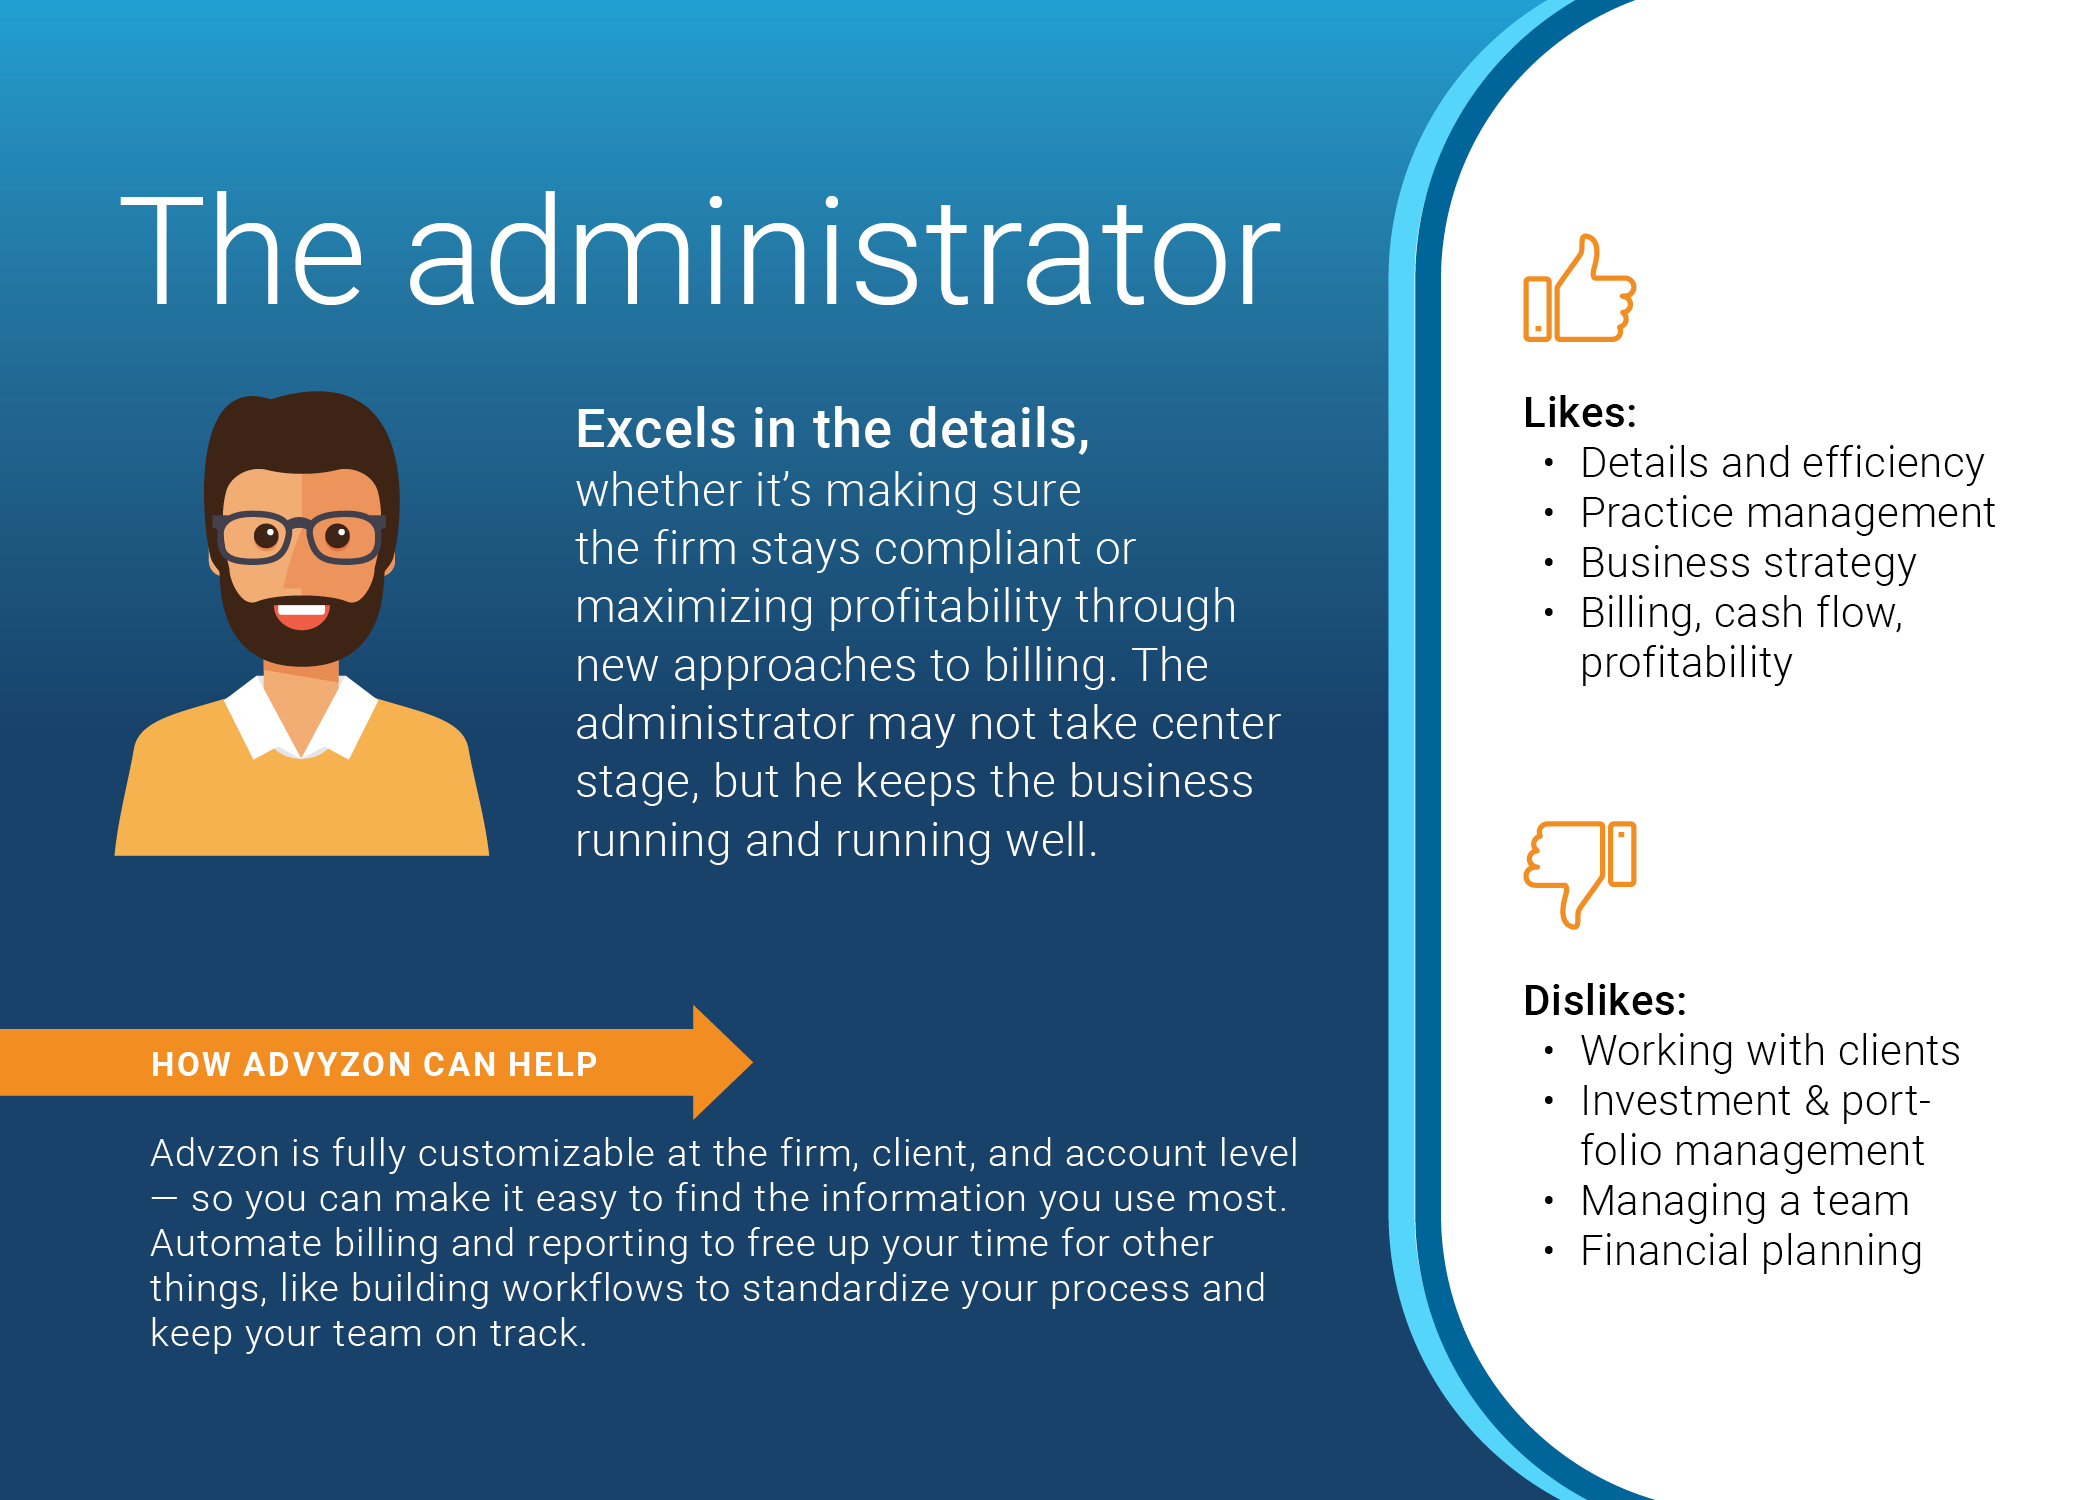 The Administrator
Excels in the details, whether it’s making sure the firm stays compliant or maximizing profitability through new approaches to billing. The administrator may not take center stage, but he keeps the business running and running well.
Likes:
    • Details and efficiency
    • Practice management
    • Business strategy
    • Billing, cash flow, profitability 
Dislikes:
    • Working with clients
    • Investment & portfolio management
    • Managing a team
    • Financial planning
How Advyzon can help
Advzon is fully customizable at the firm, client, and account level — so you can make it easy to find the information you use most. Automate billing and reporting to free up your time for other things, like building workflows to standardize your process and keep your team on track. 
